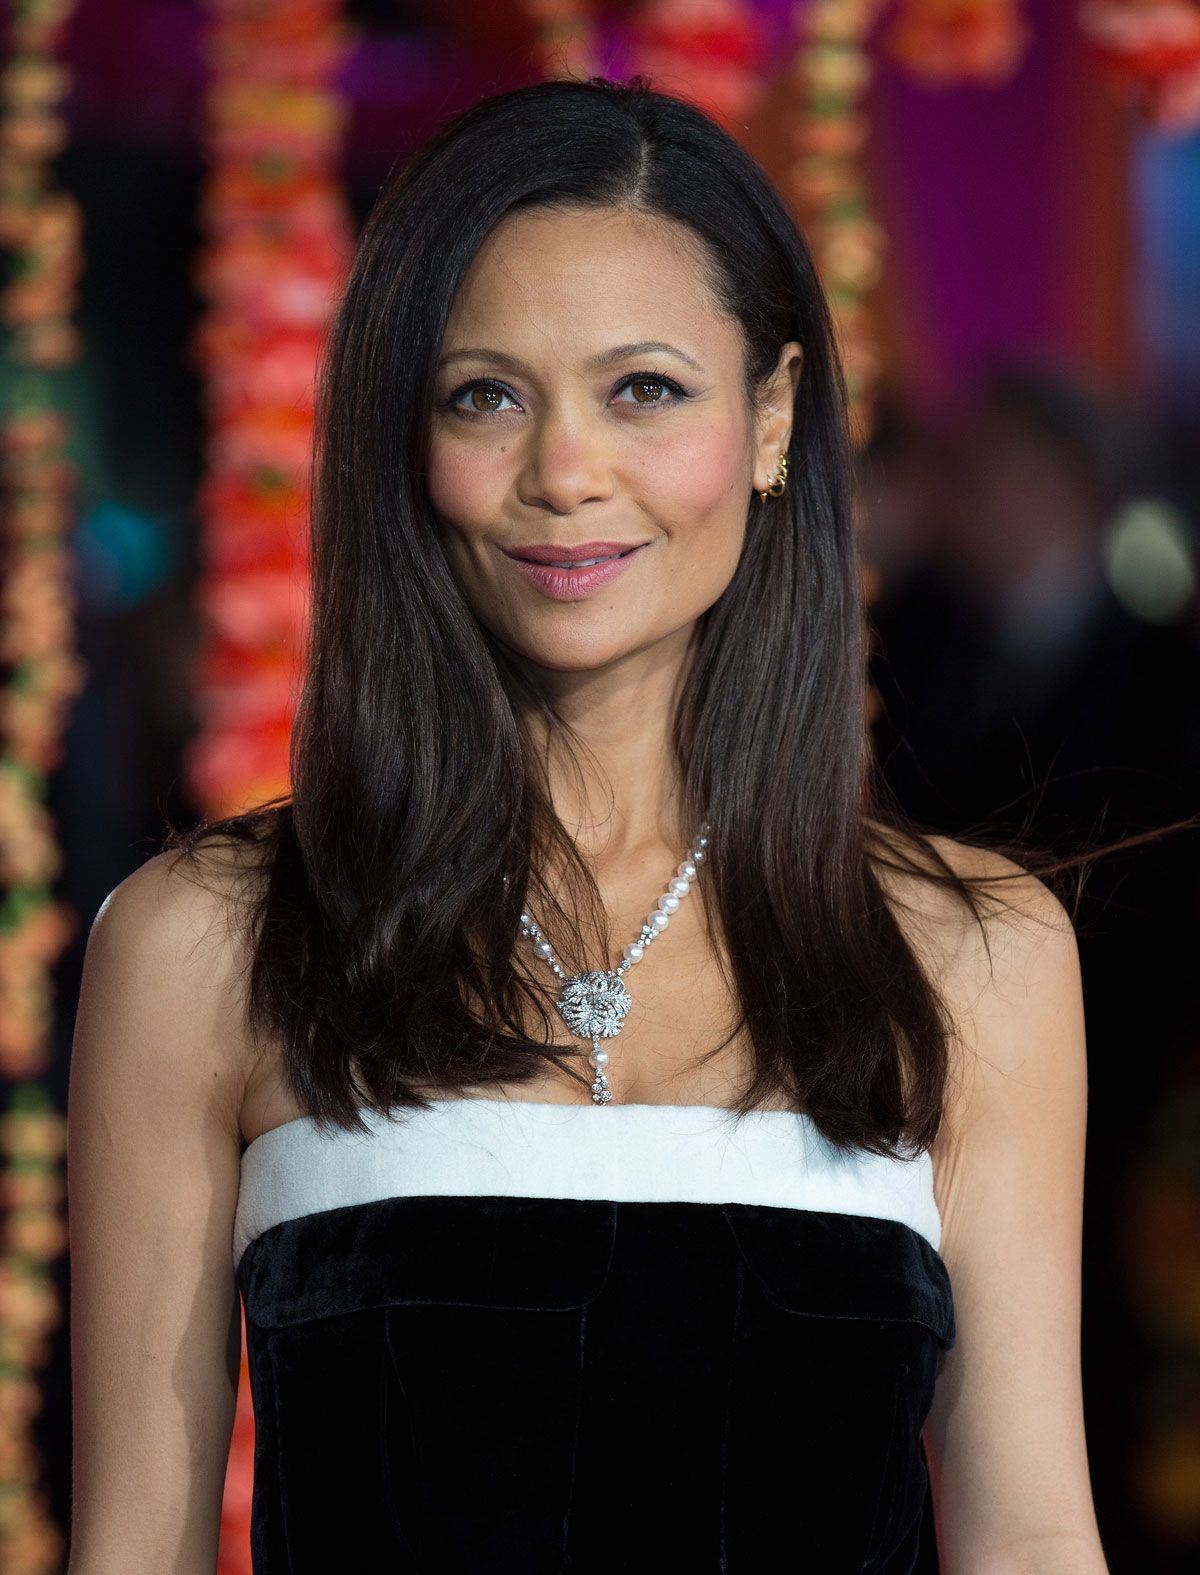 THANDIE NEWTON at Royal Performance and Premiere of The Second Best Exotic Marigold Hotel